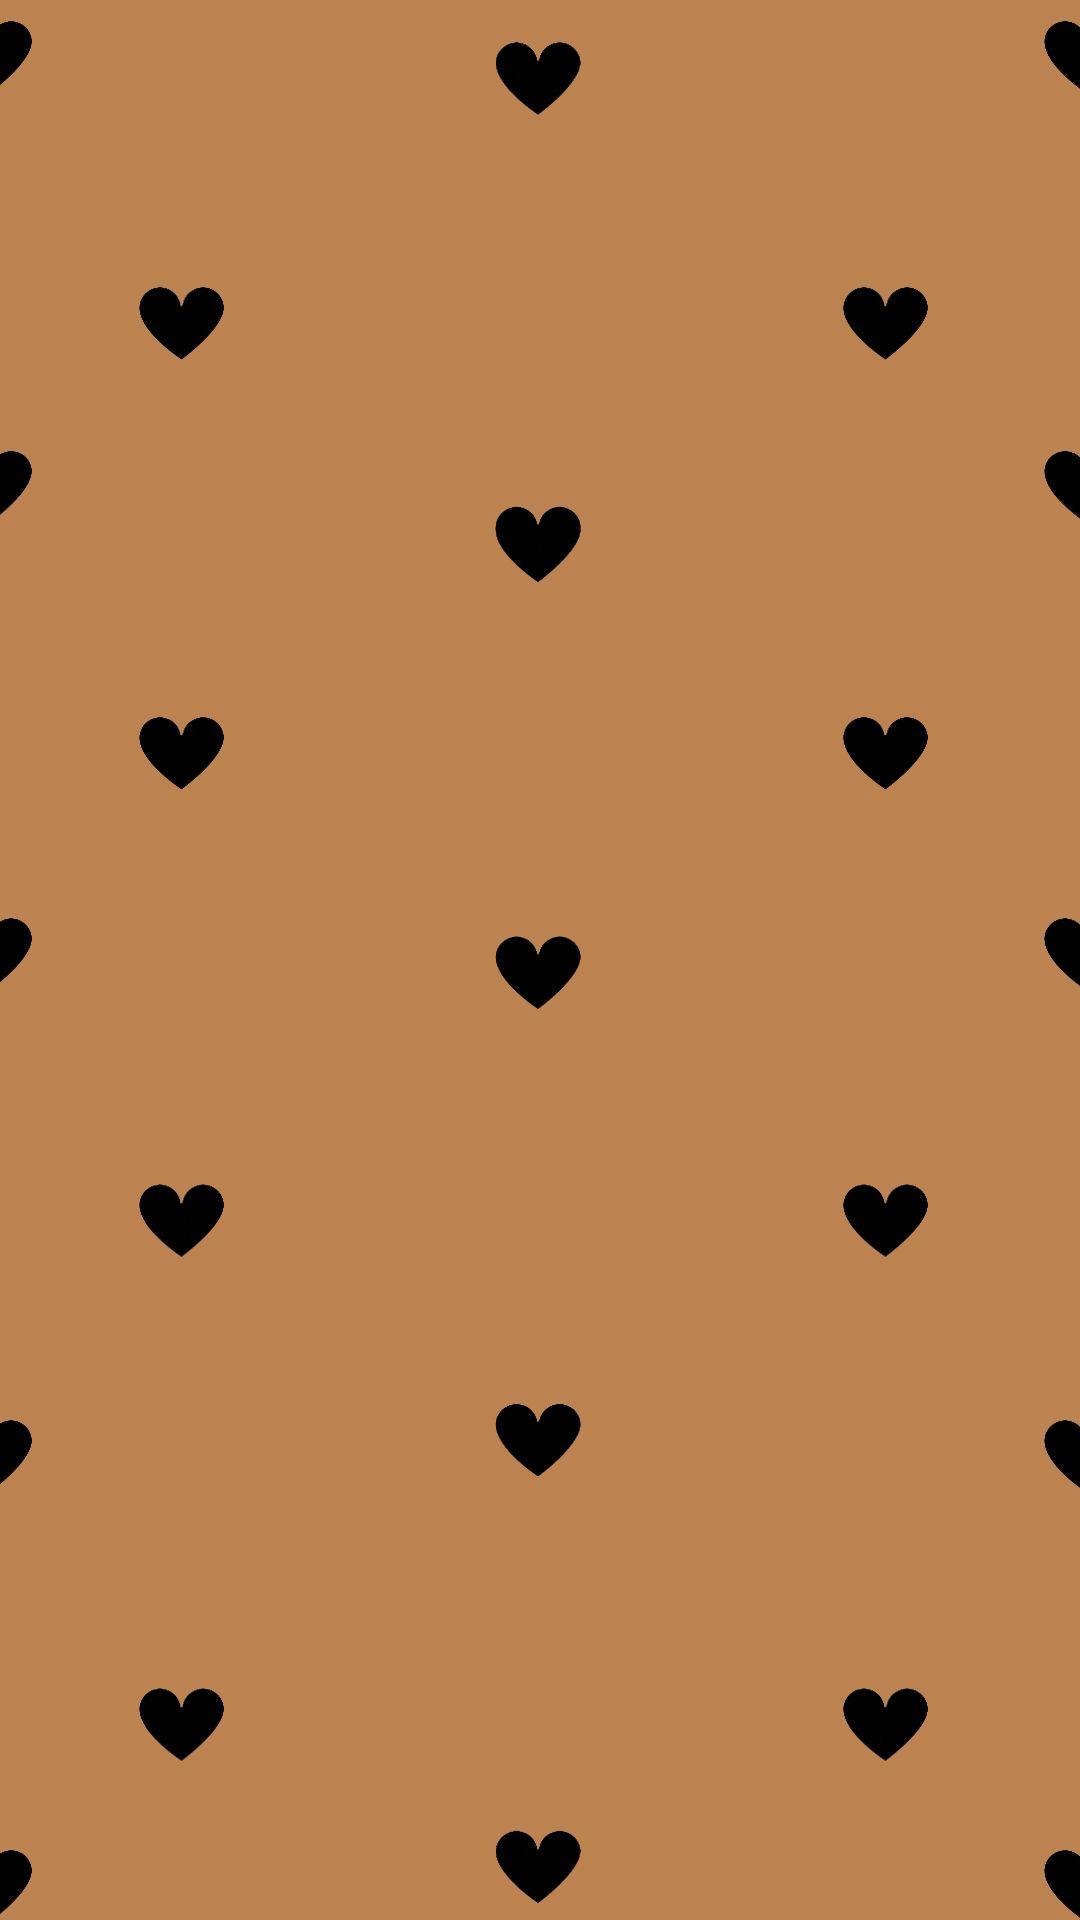  Brown Heart Background Loop  Background Video Love 1 HOUR  YouTube